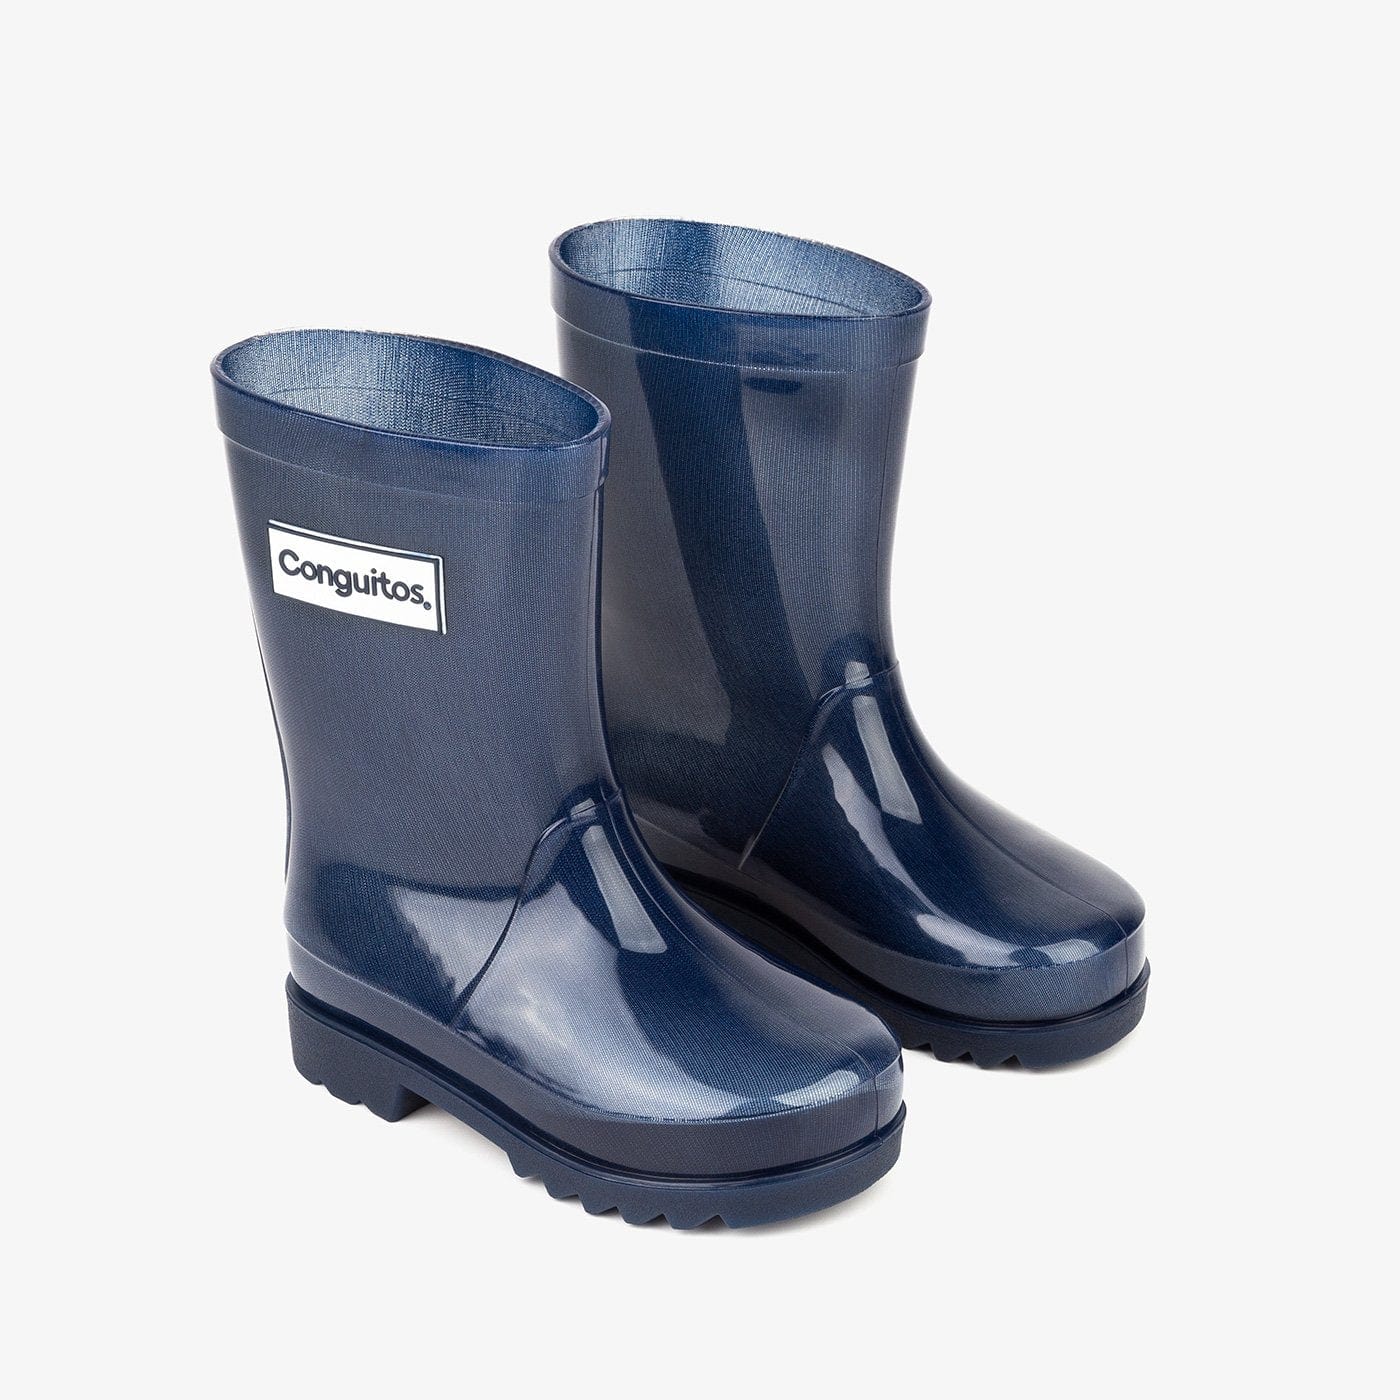 CONGUITOS Shoes Unisex Navy Rain Boots with Lights